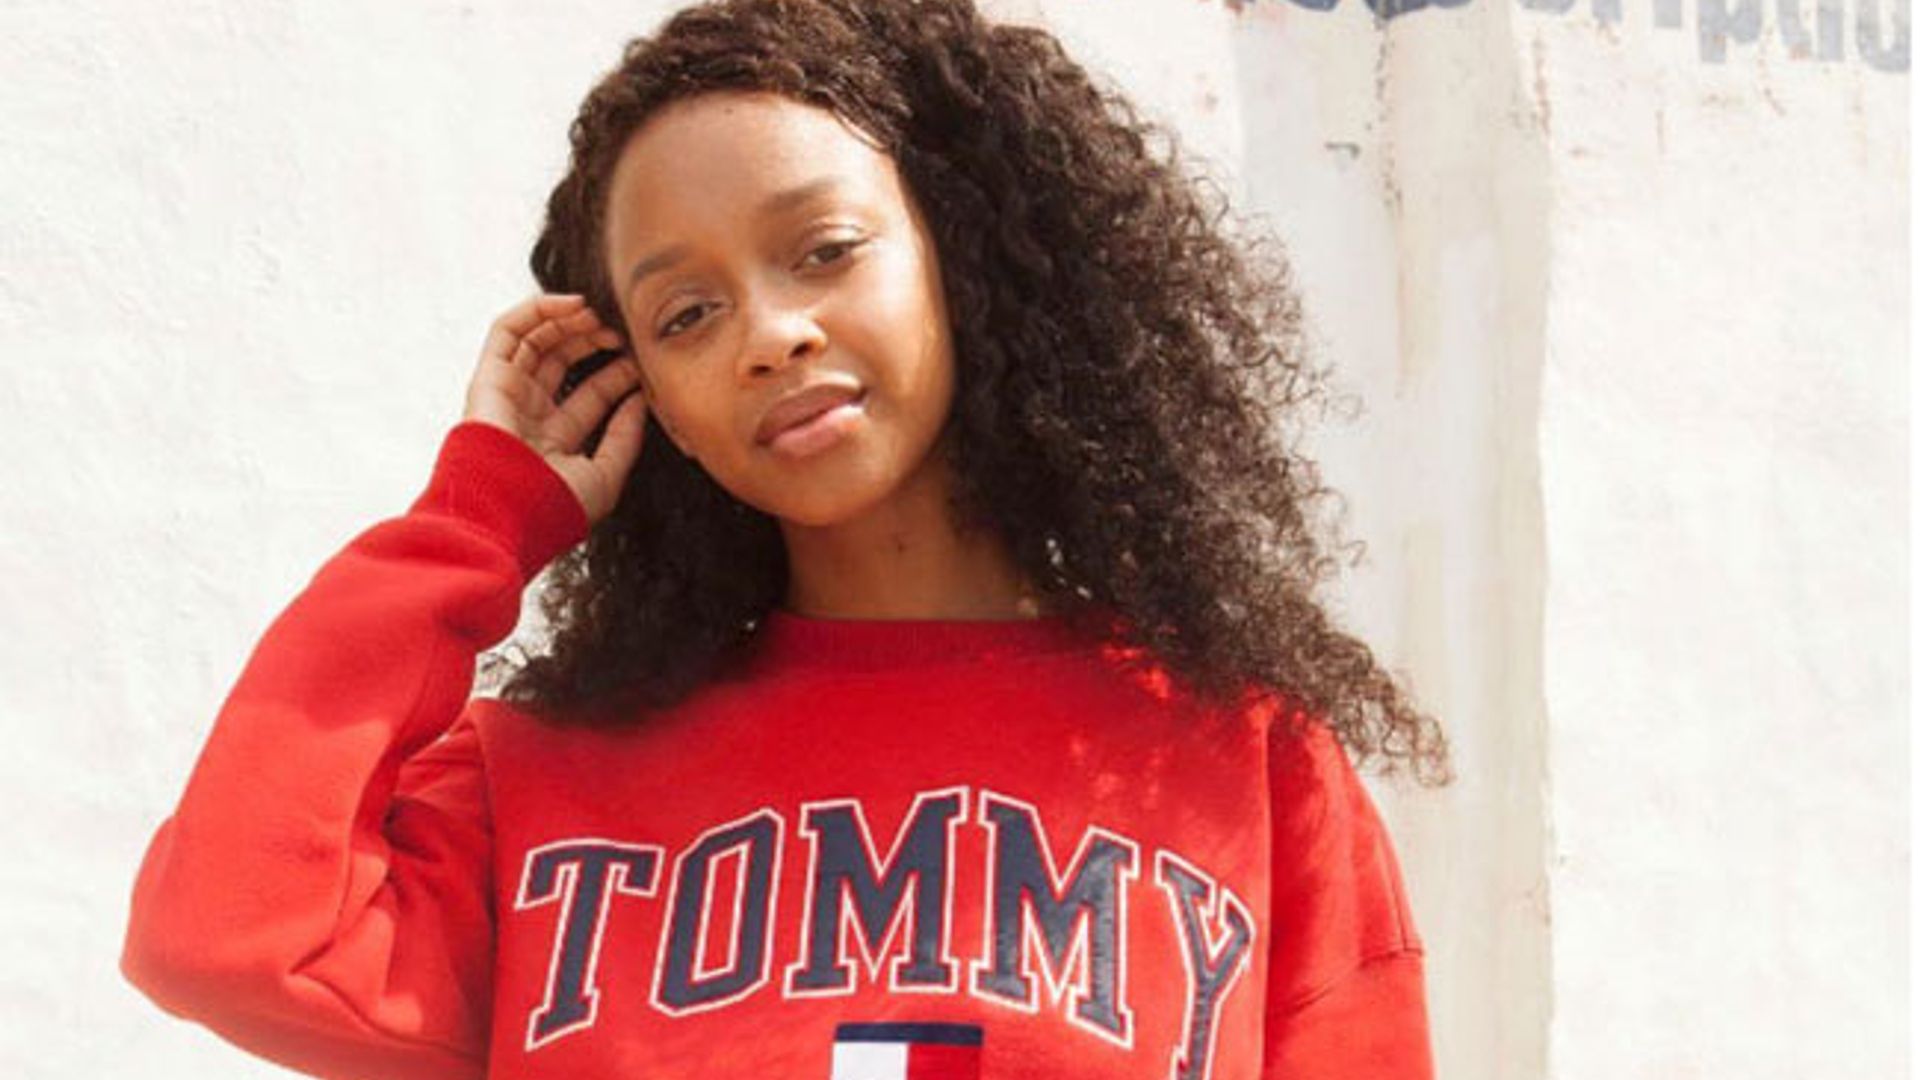 Tommy Hilfiger relaunches denim line as Tommy Jeans